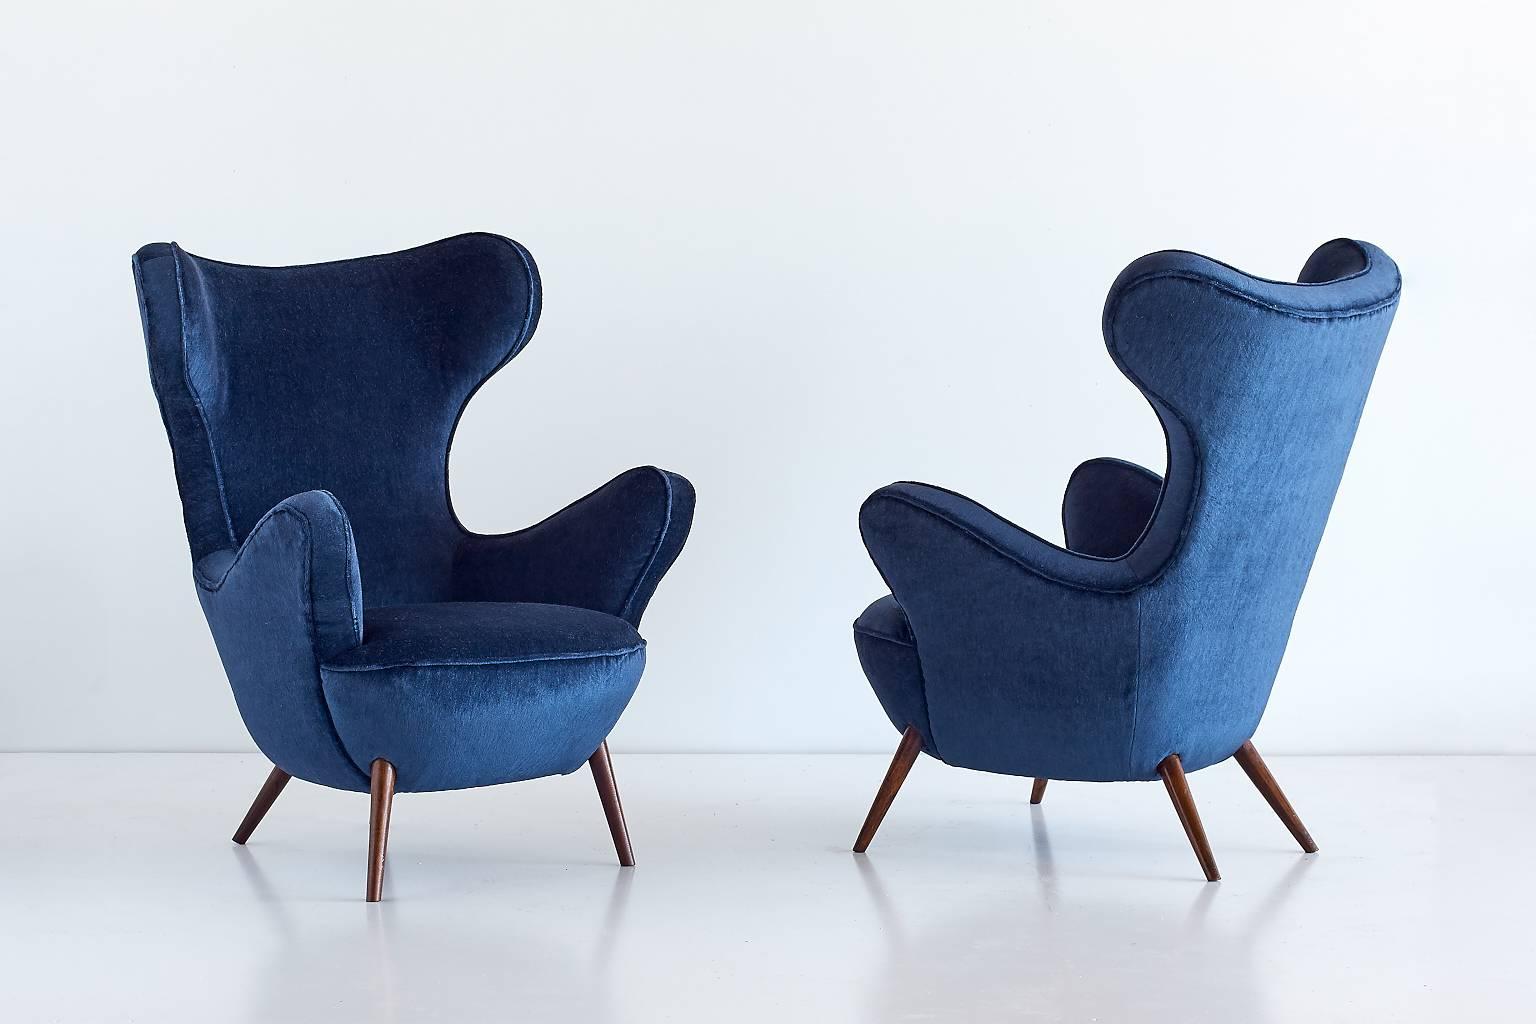 This rare pair of armchairs was designed by Paolo Malchiodi for a private residence near Florence in the late 1940s. Due to their sensual, organic curves and the strikingly positioned tapered legs the chairs evoke a sculptural and modern feel.